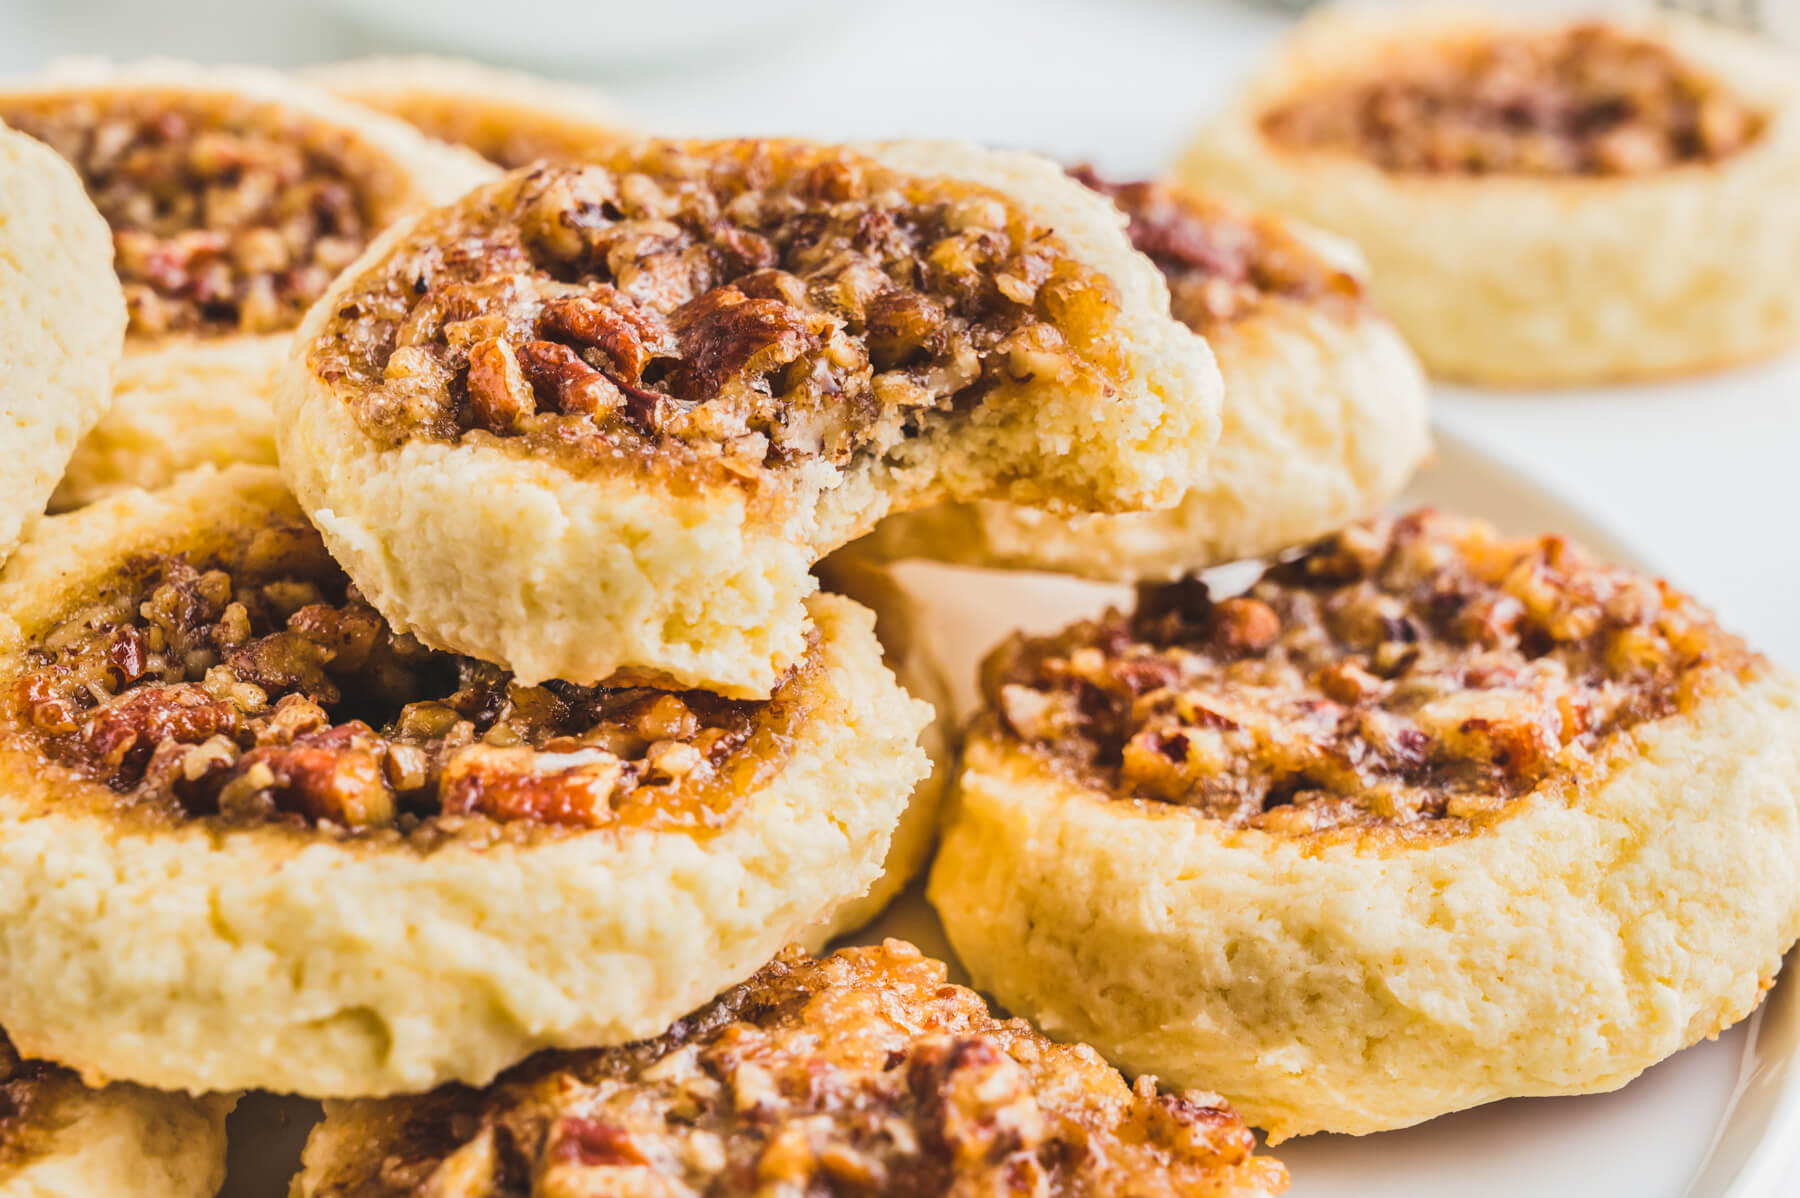 A pile of pecan pie cookies on a white plate.